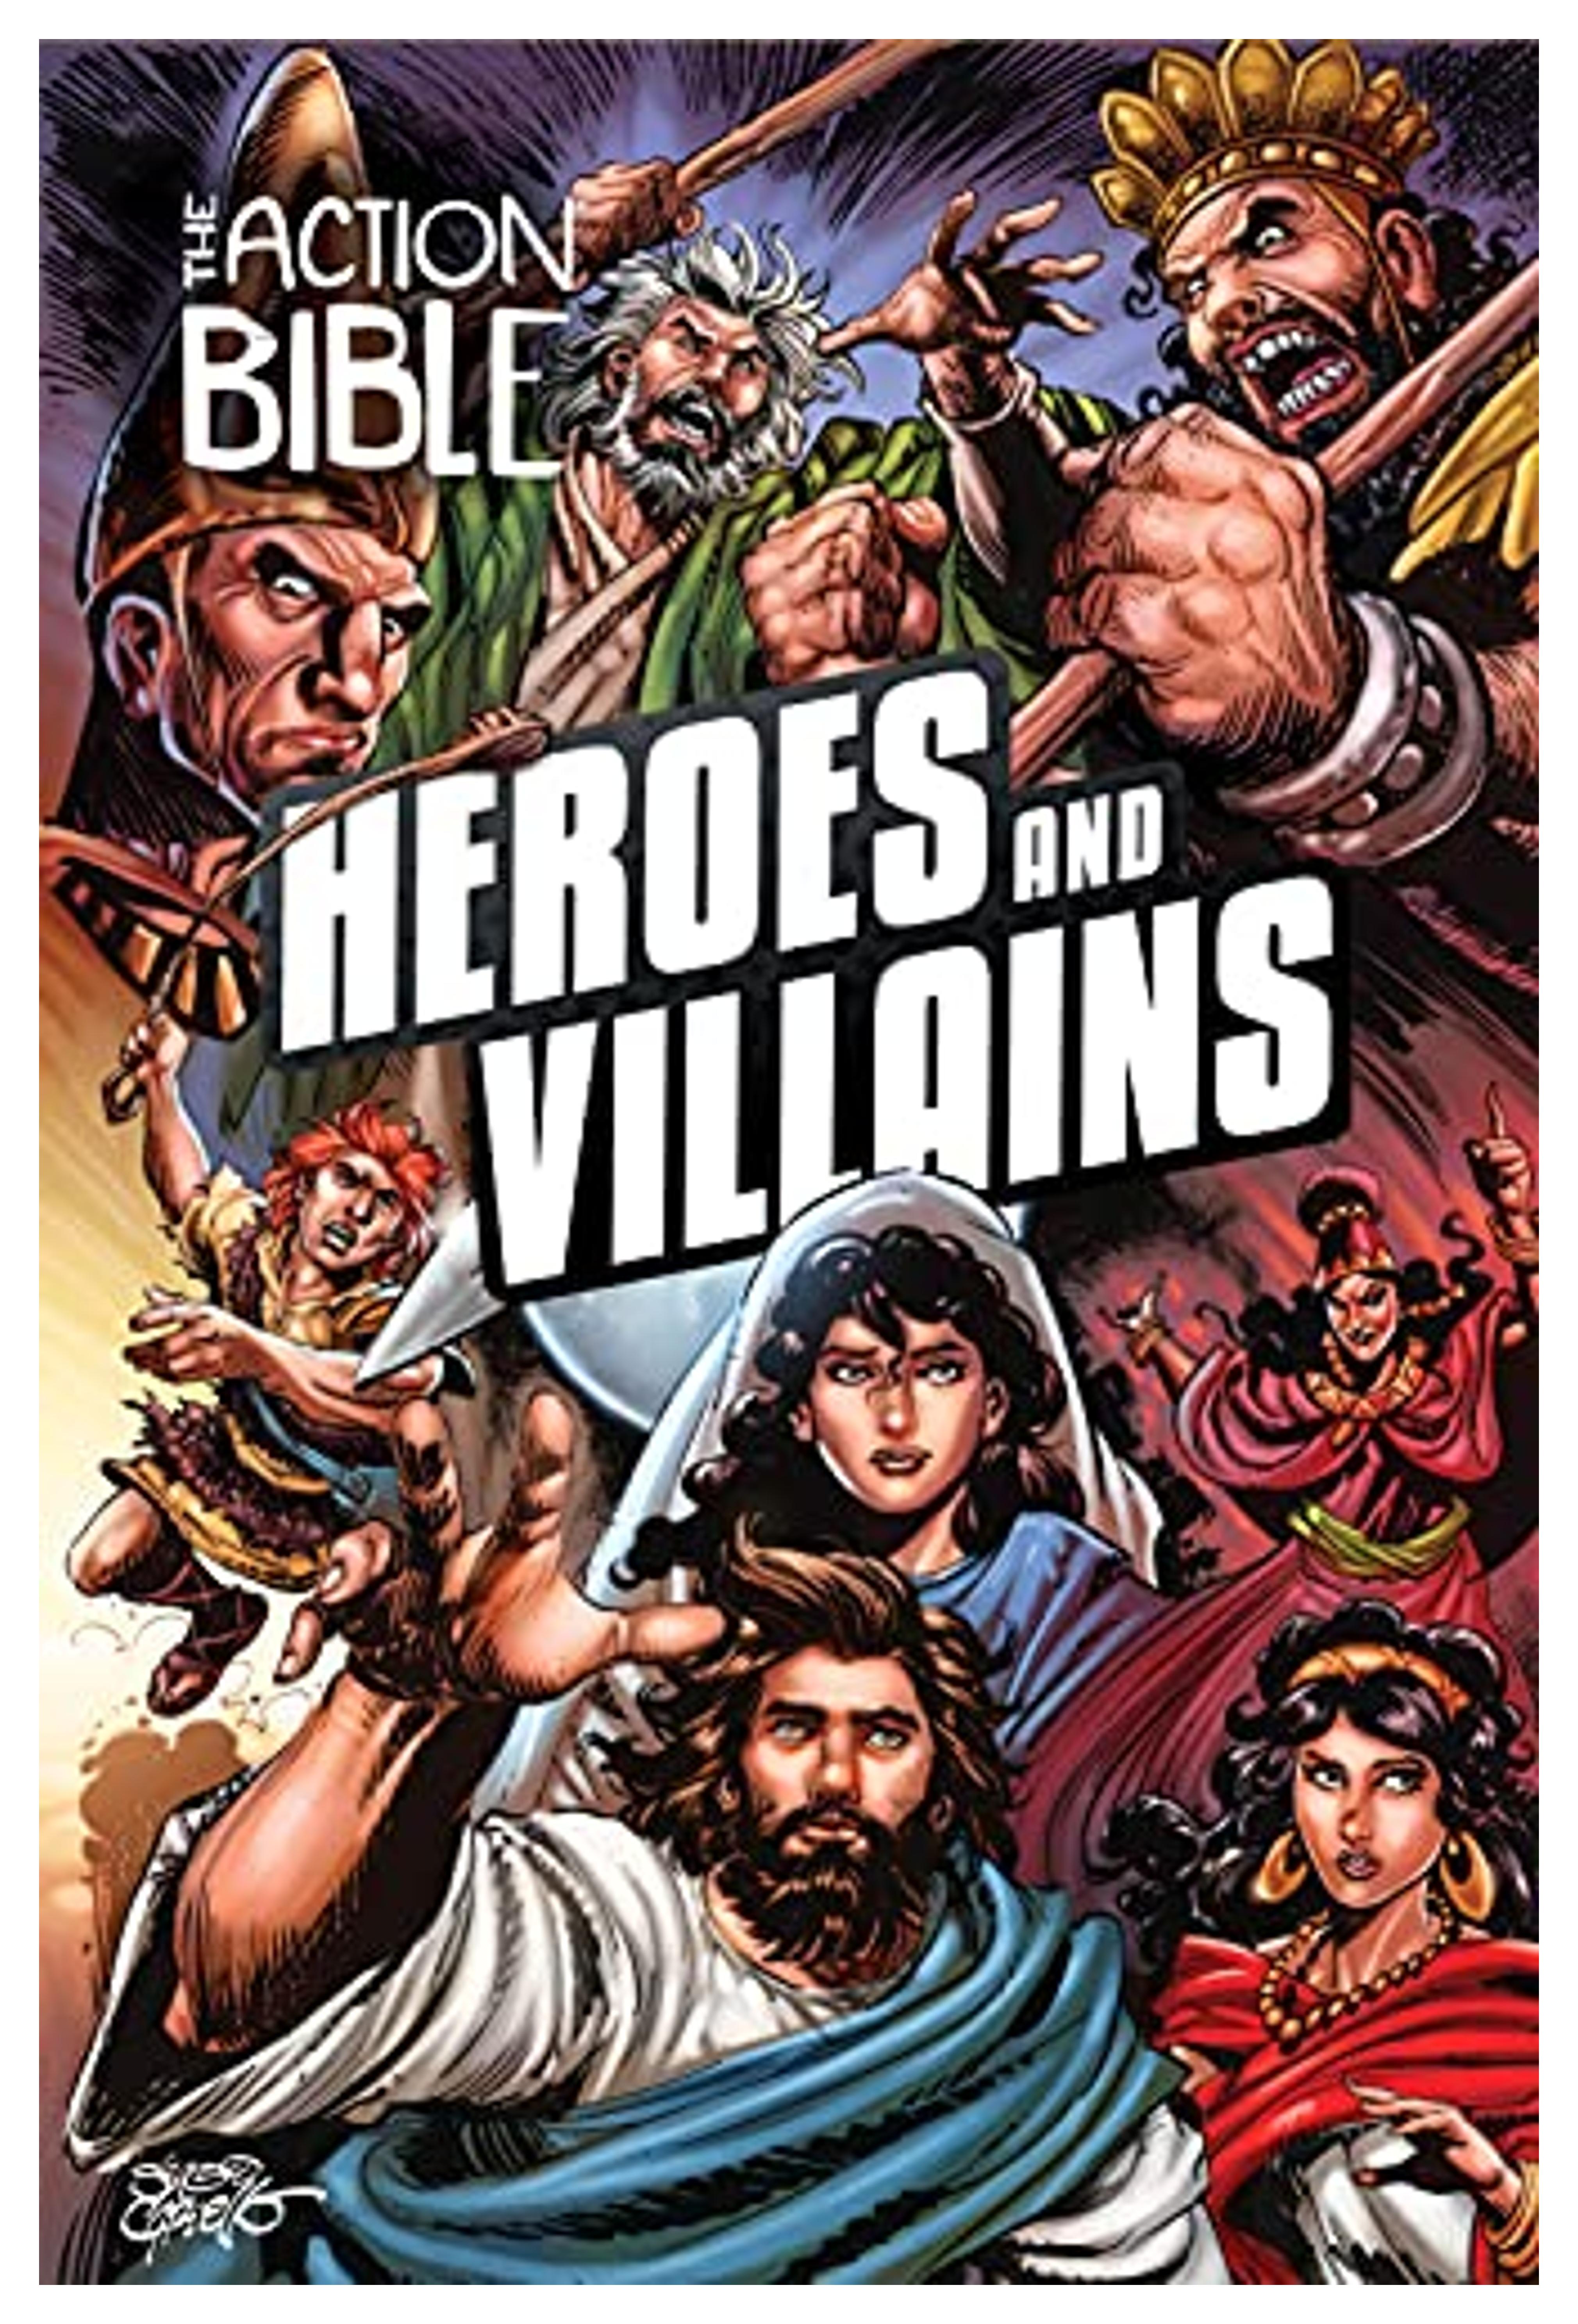 The Action Bible: Heroes and Villains (Action Bible Series)